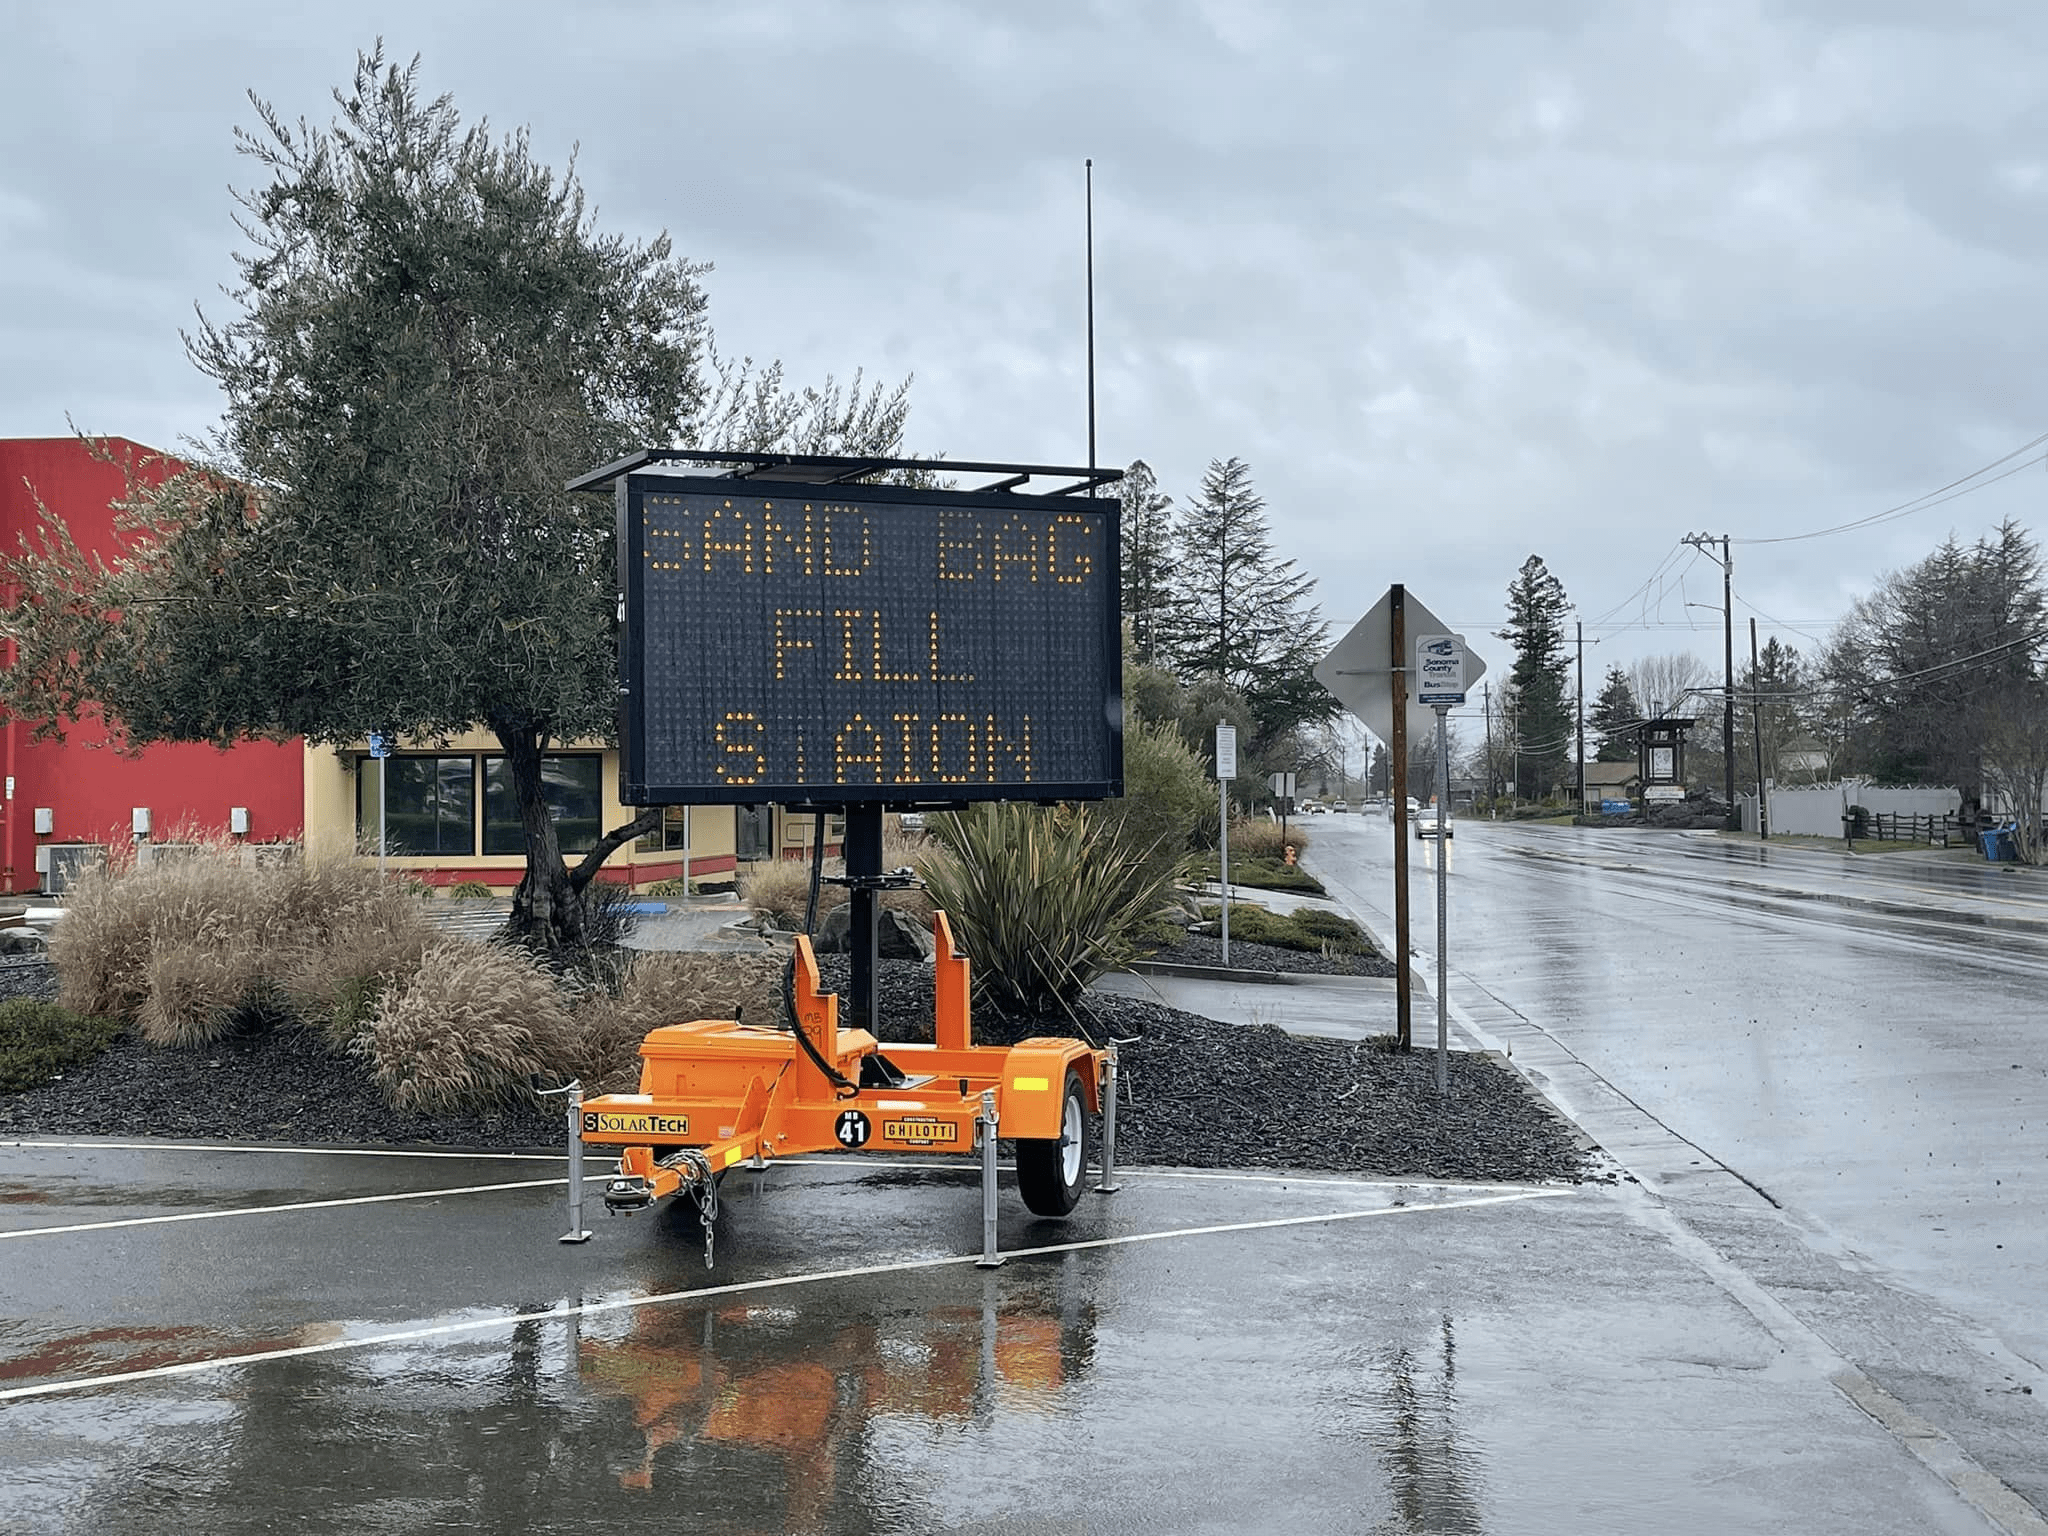 sand-bag-station-at-ghilotti-construction-238-todd-rd-sonoma-county-fire-district